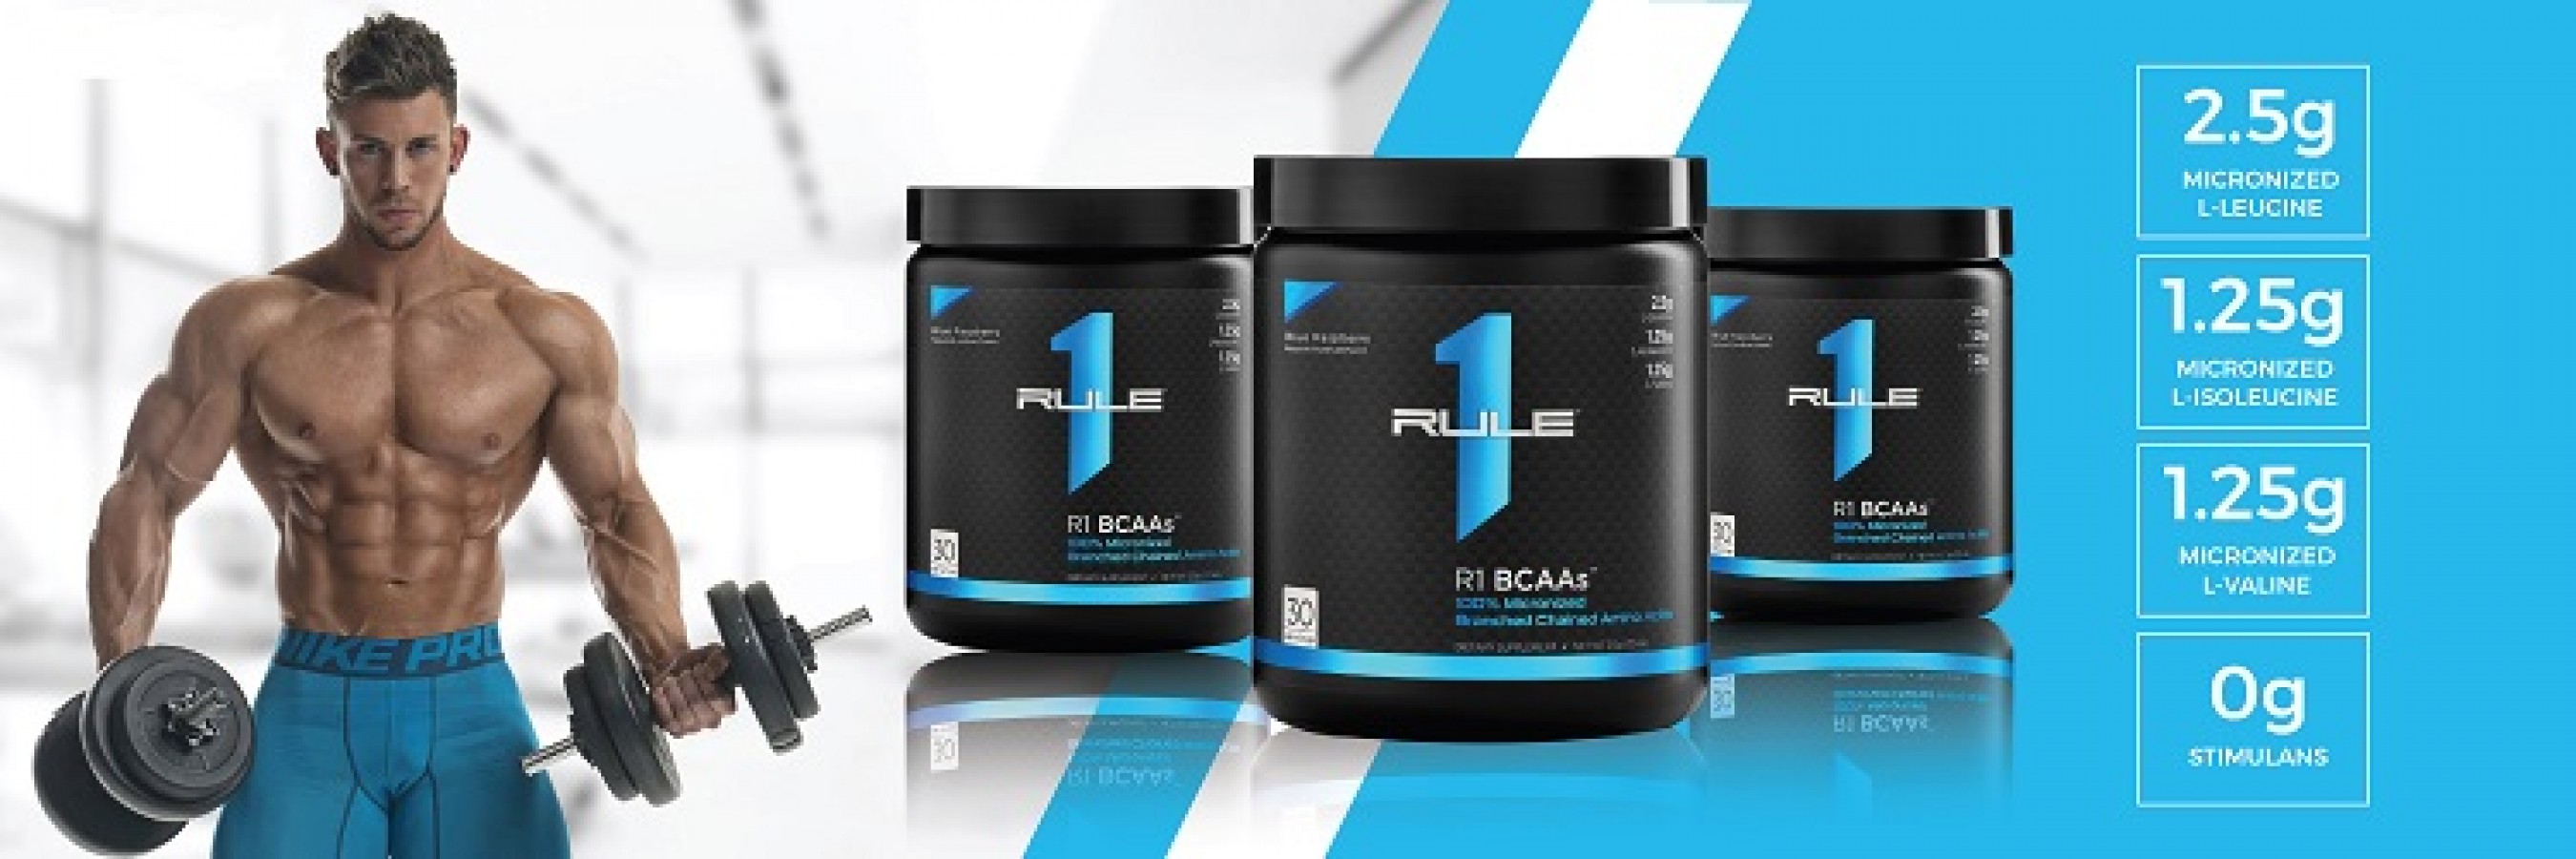 Thức Uống Năng Lượng Rule 1 Creatine 30 Serv Unflavored